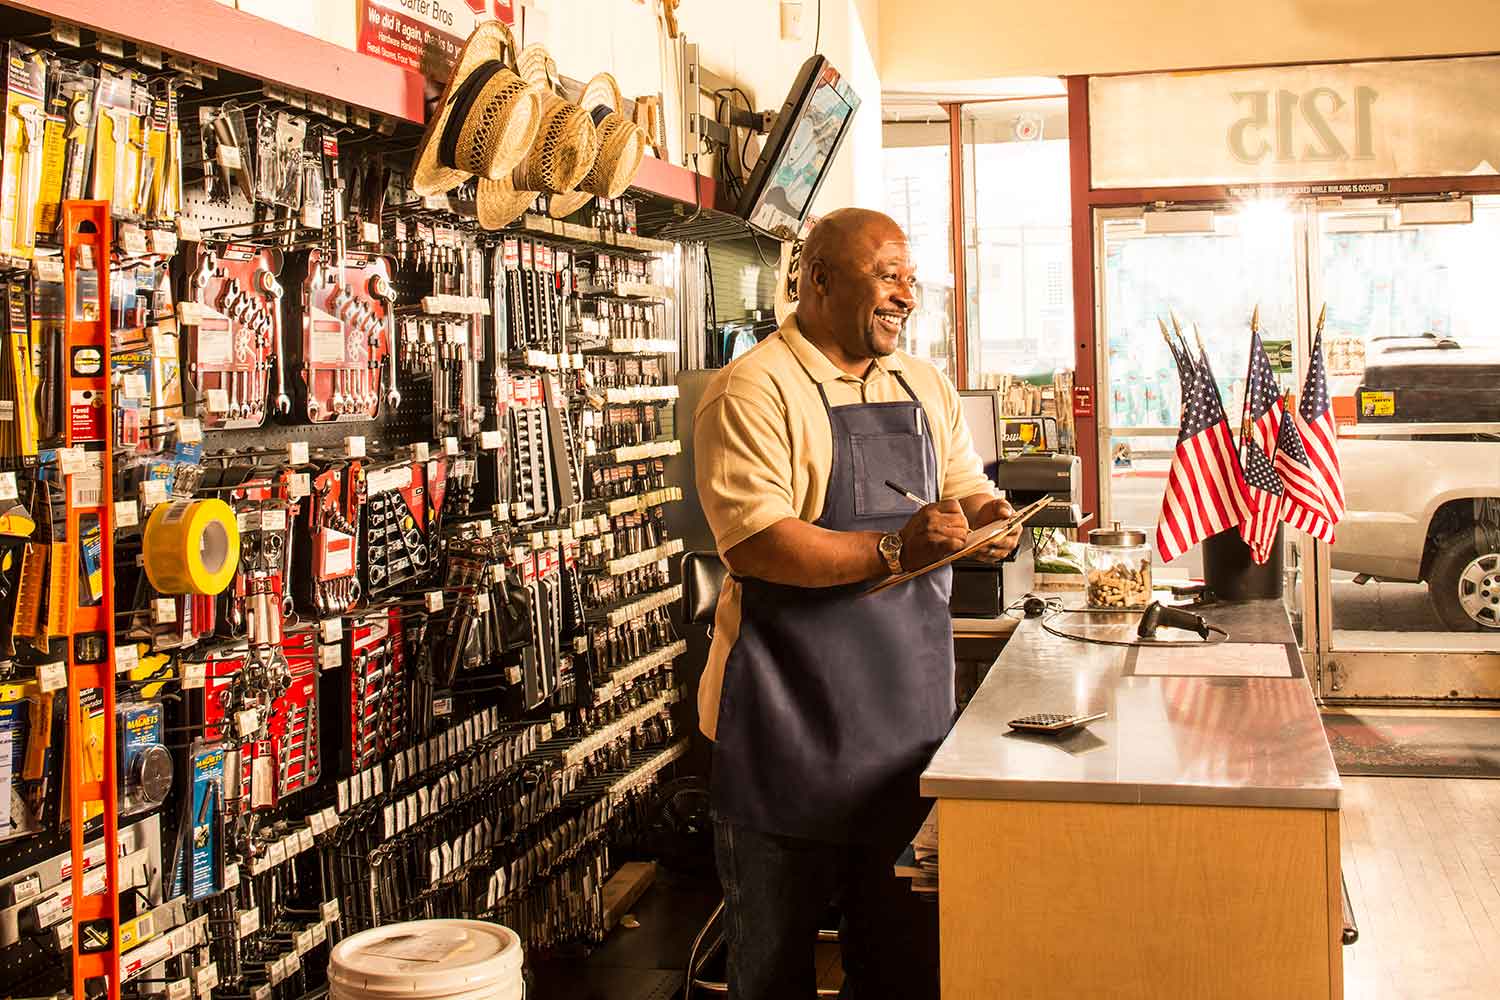 Man stands behind counter of a hardware store